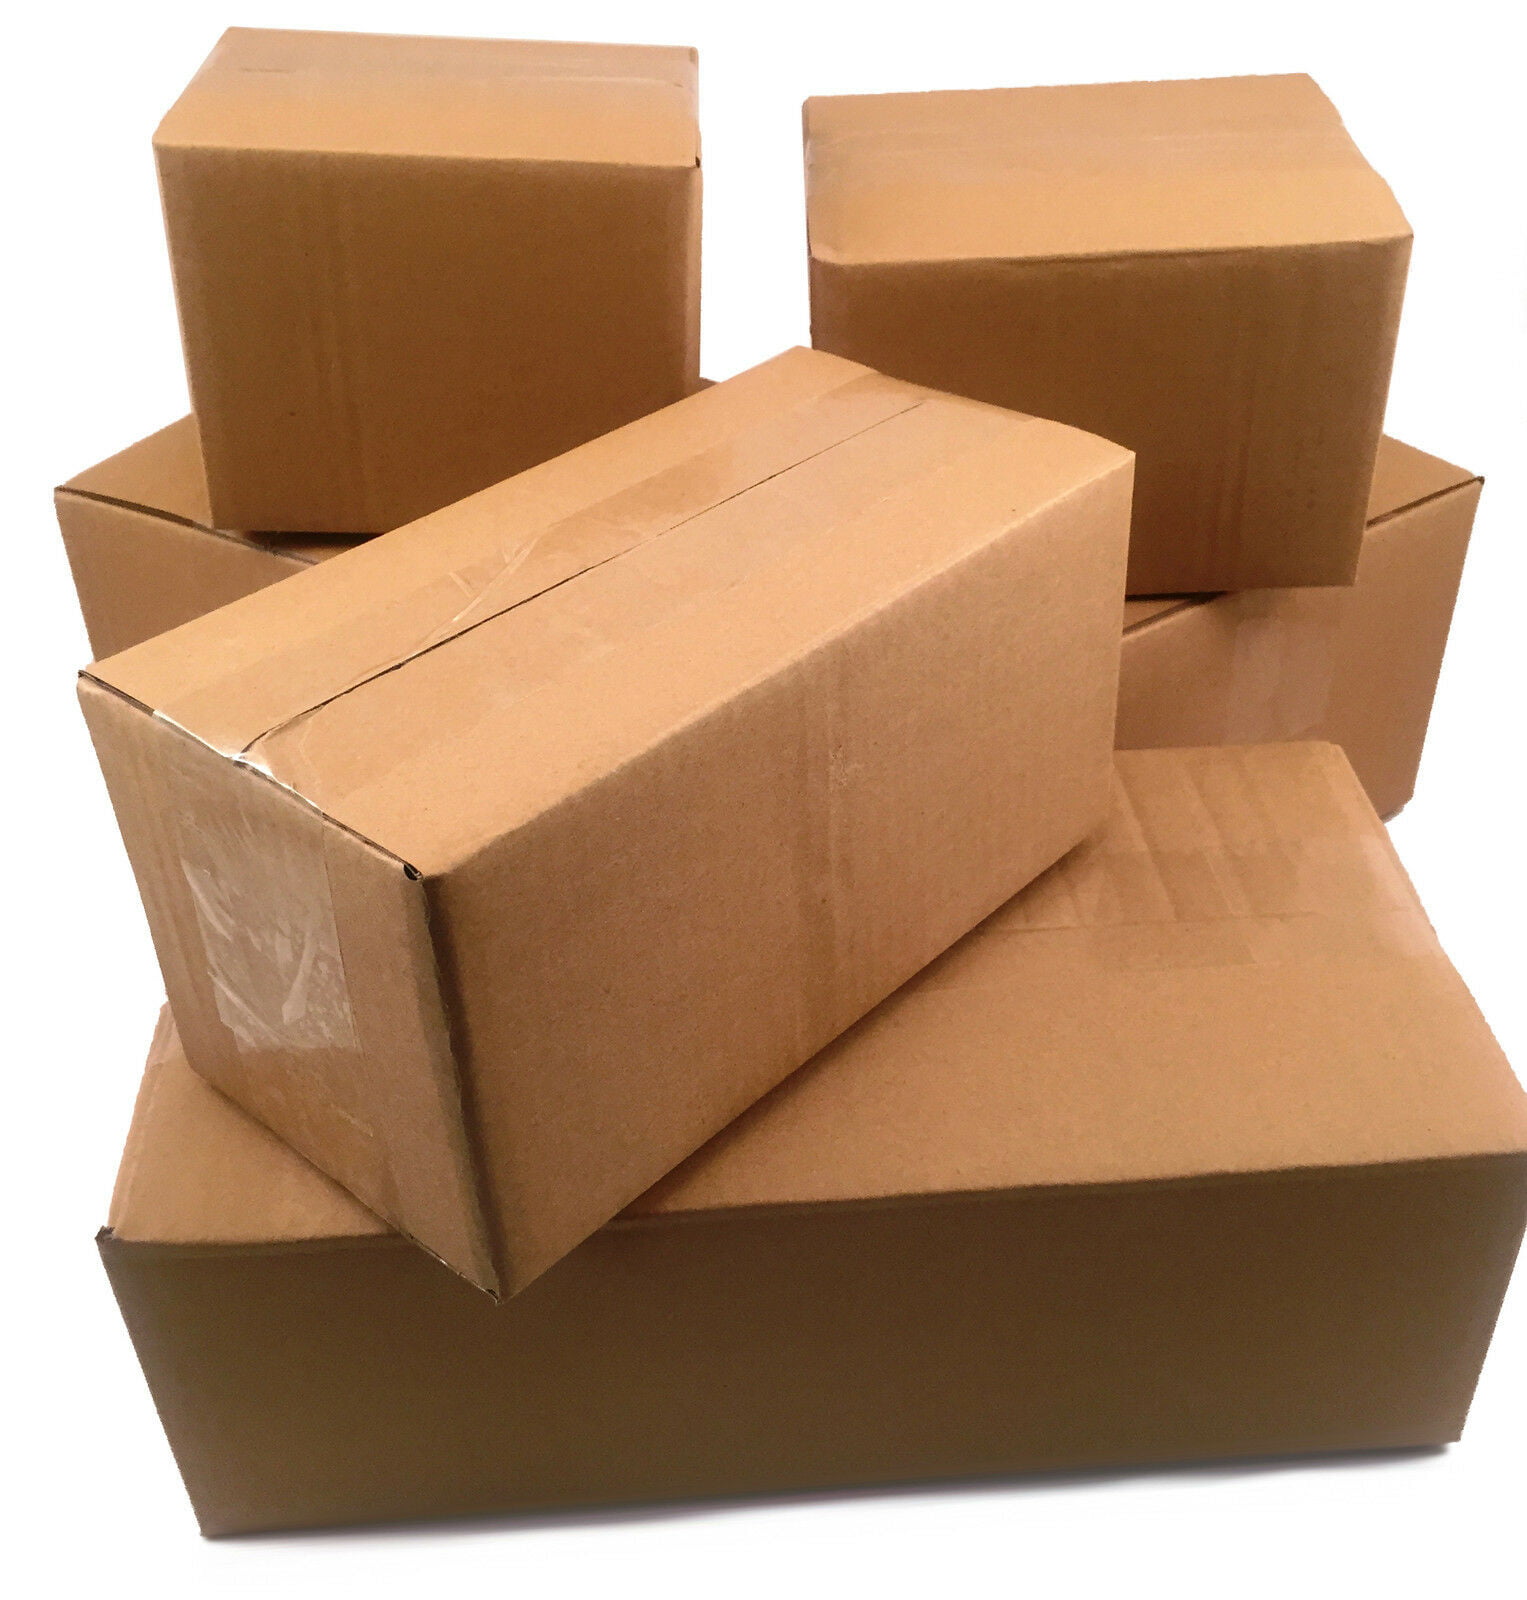 150 12x4x4 White Cardboard Paper Boxes Mailing Packing Shipping Box Carton 